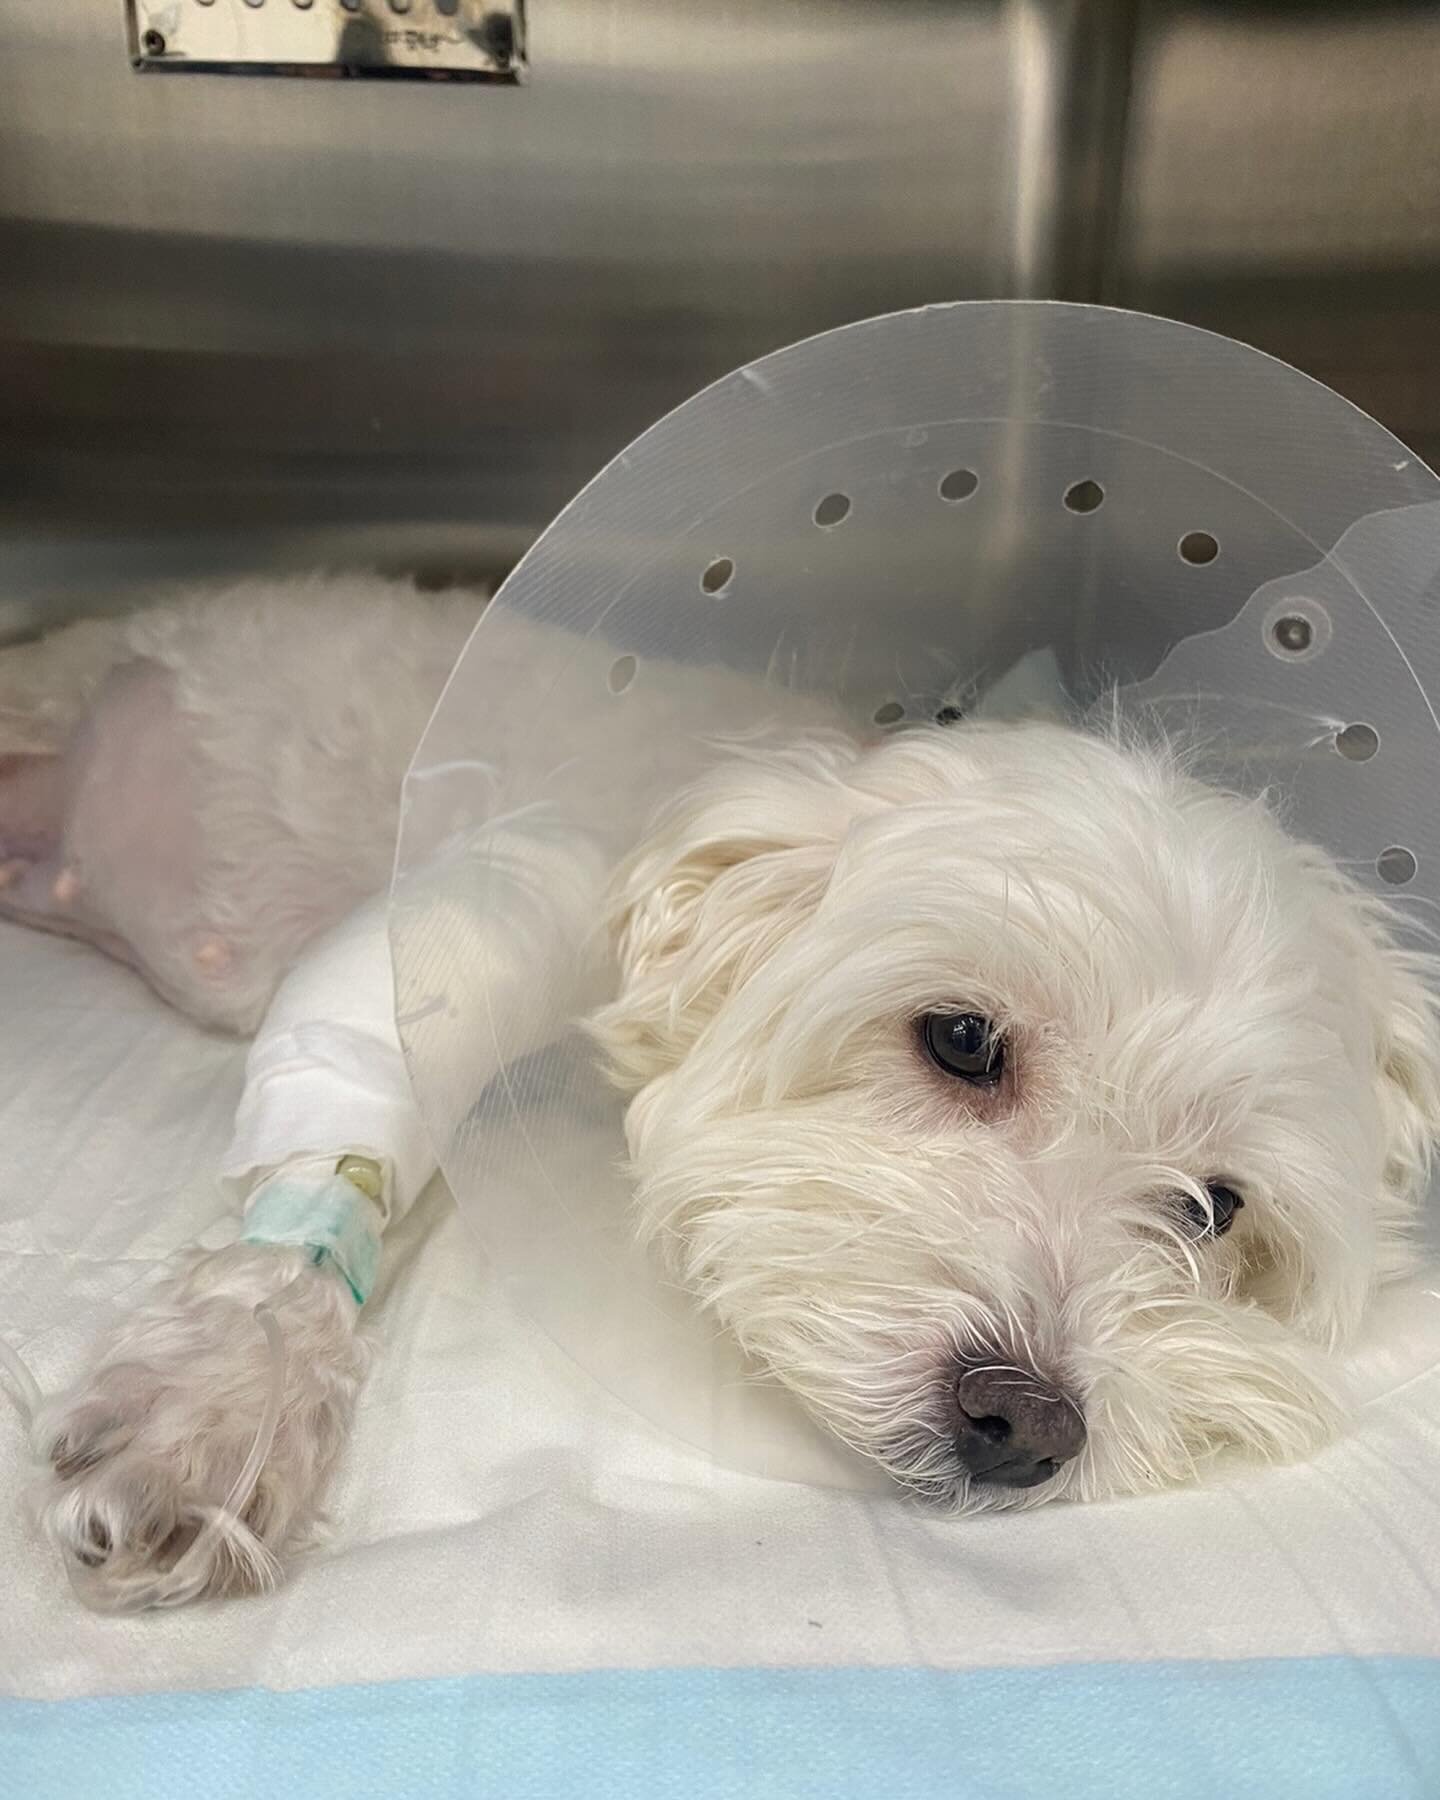 Following our recent update, we urgently rushed Amy @joeyandbailey_amy to the hospital, where she has been diagnosed with Pyometra, a severe and potentially fatal uterine infection characterized by the accumulation of pus and bacteria. Unfortunately,